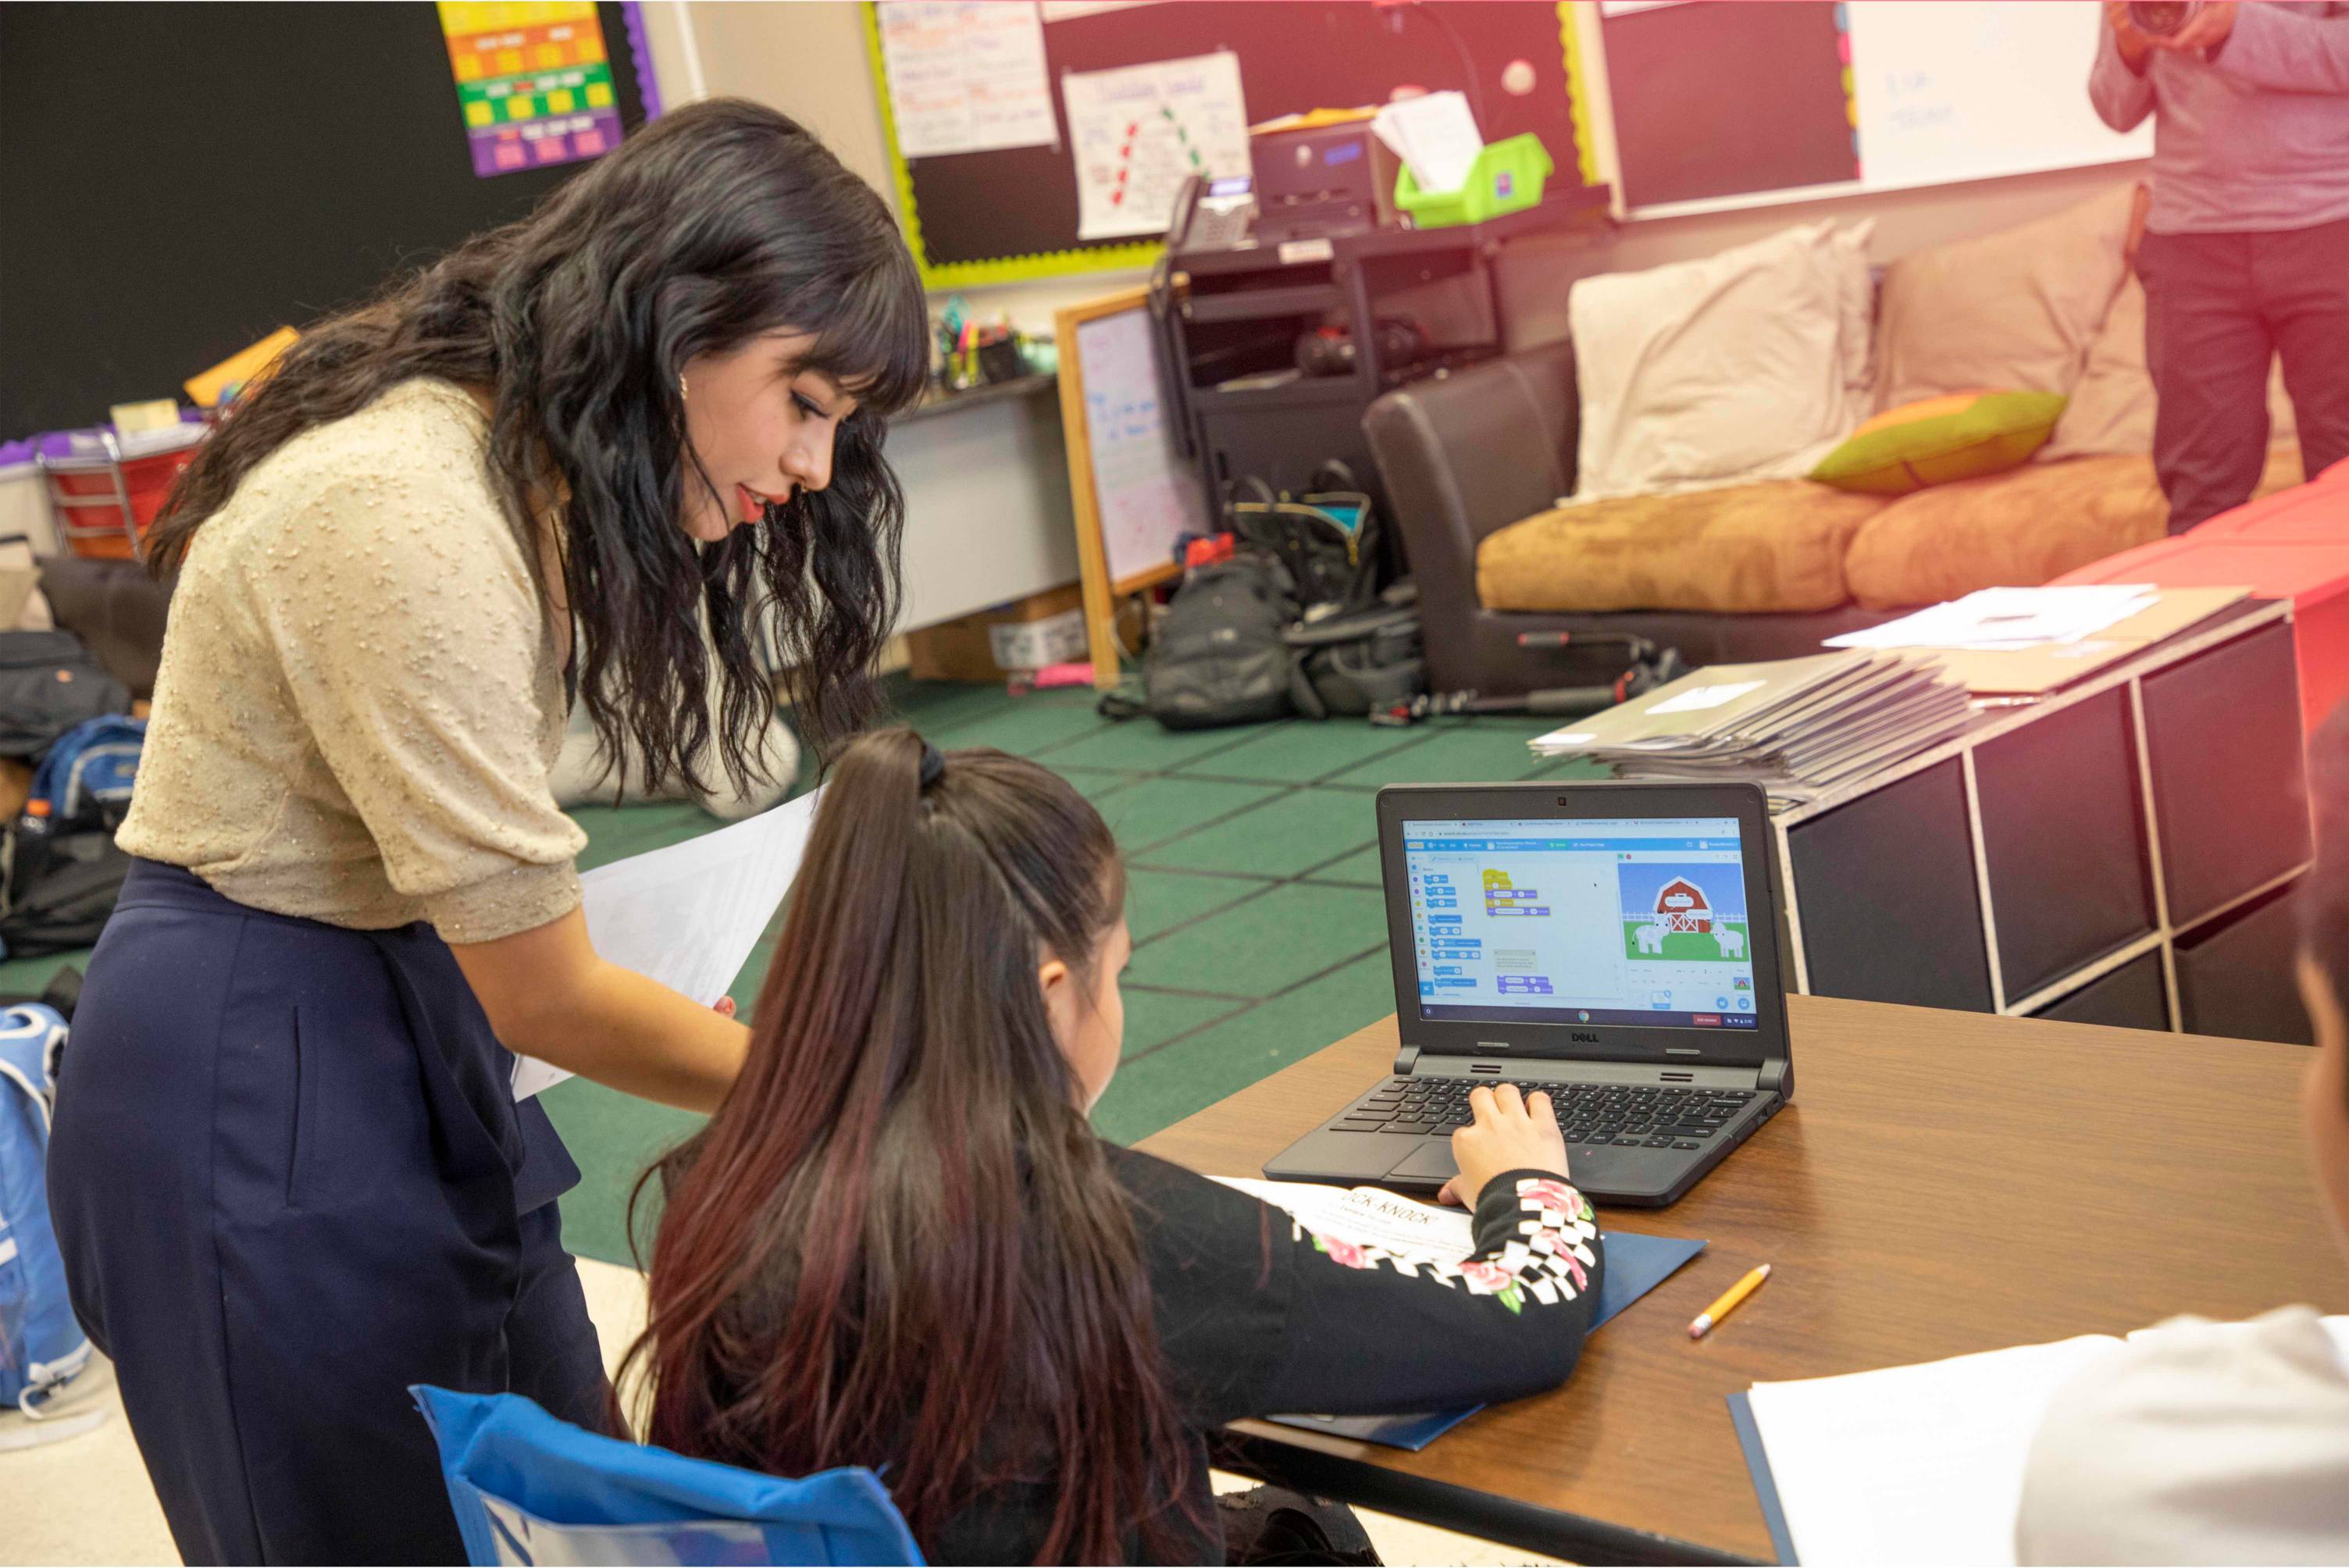 A teacher showing a child how to use a computer program in a classroom.